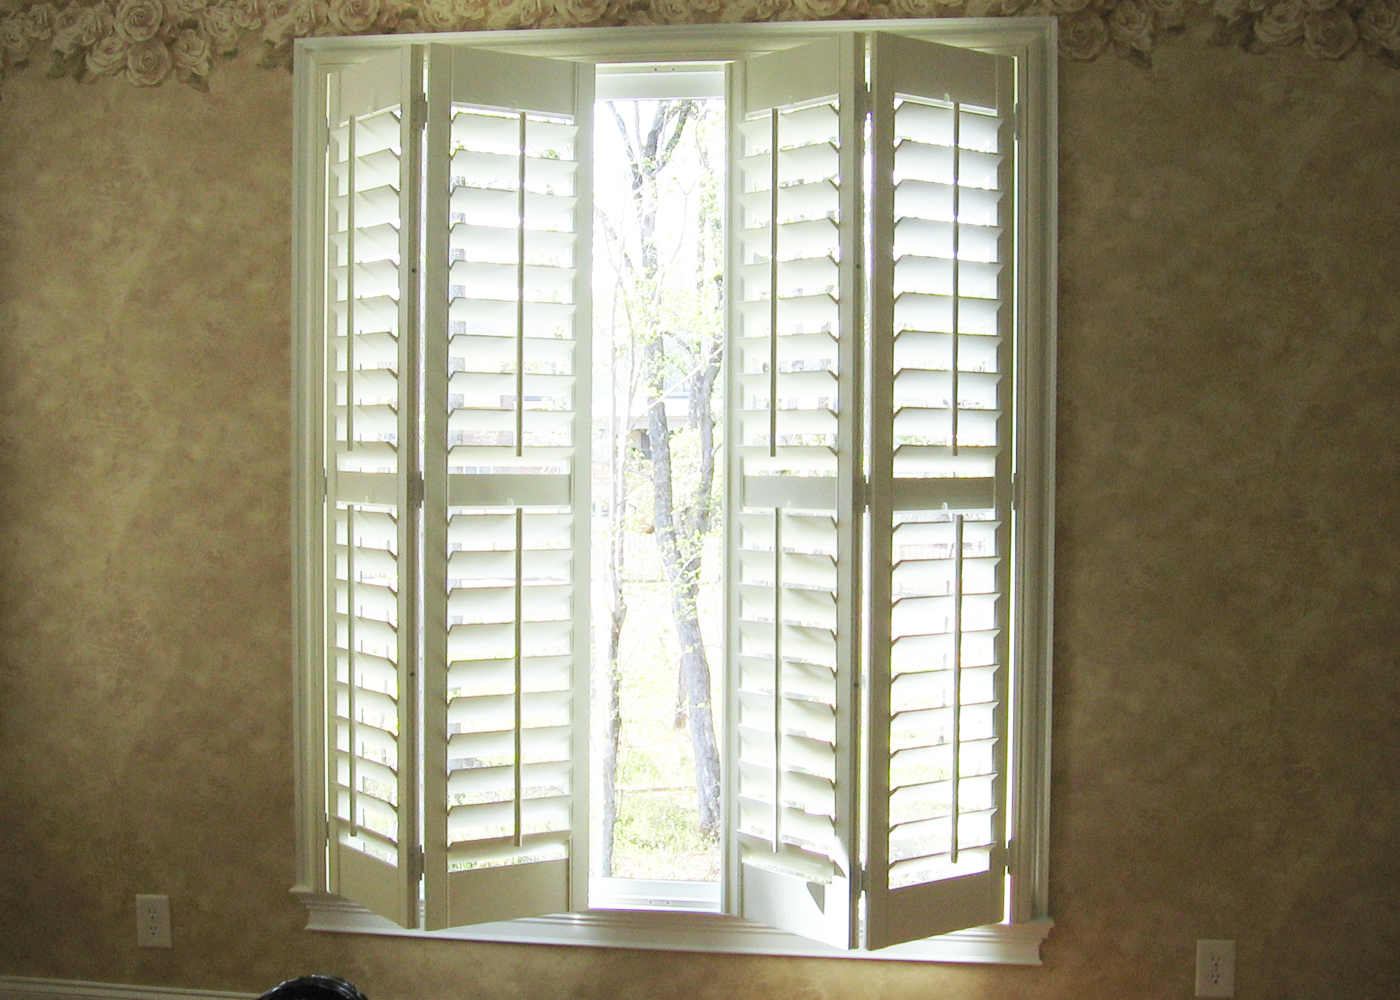 New Vision Shutters – Poly Shutters